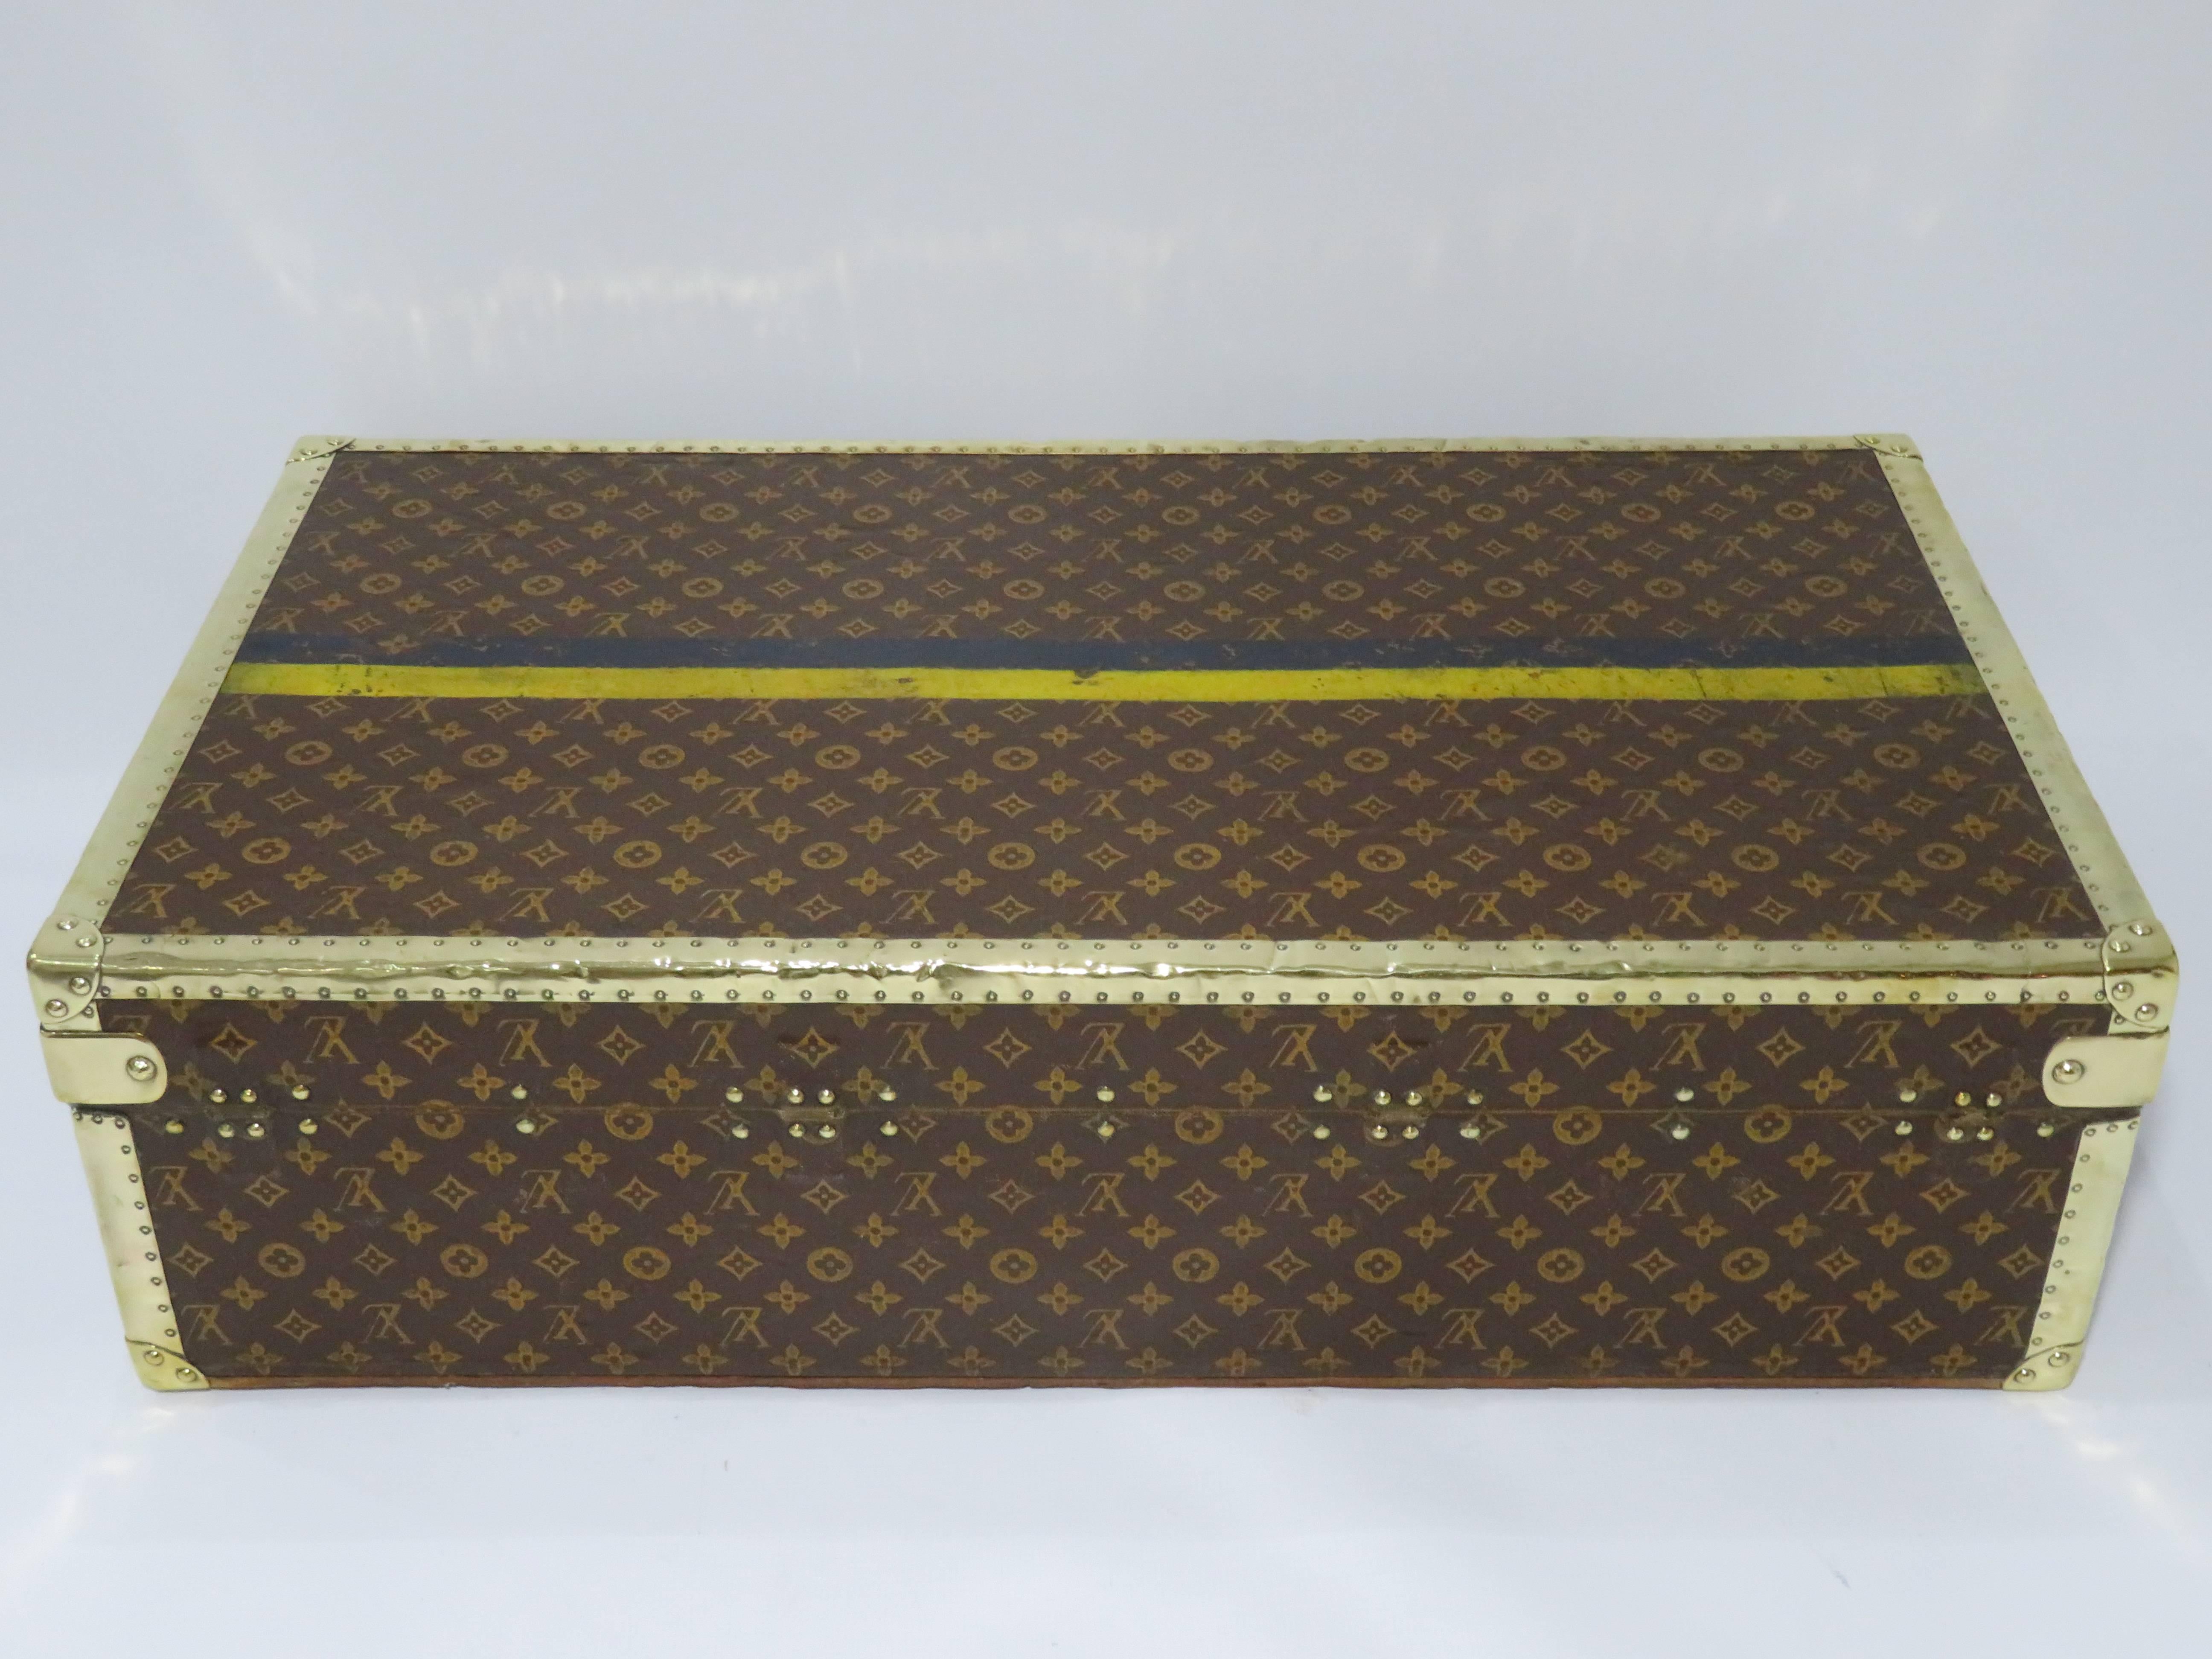 For sale a very rare Louis Vuitton explorer's range monogram and brass motor trunk in excellent condition for age.
100% original, one of the rarest trunks currently available for sale.